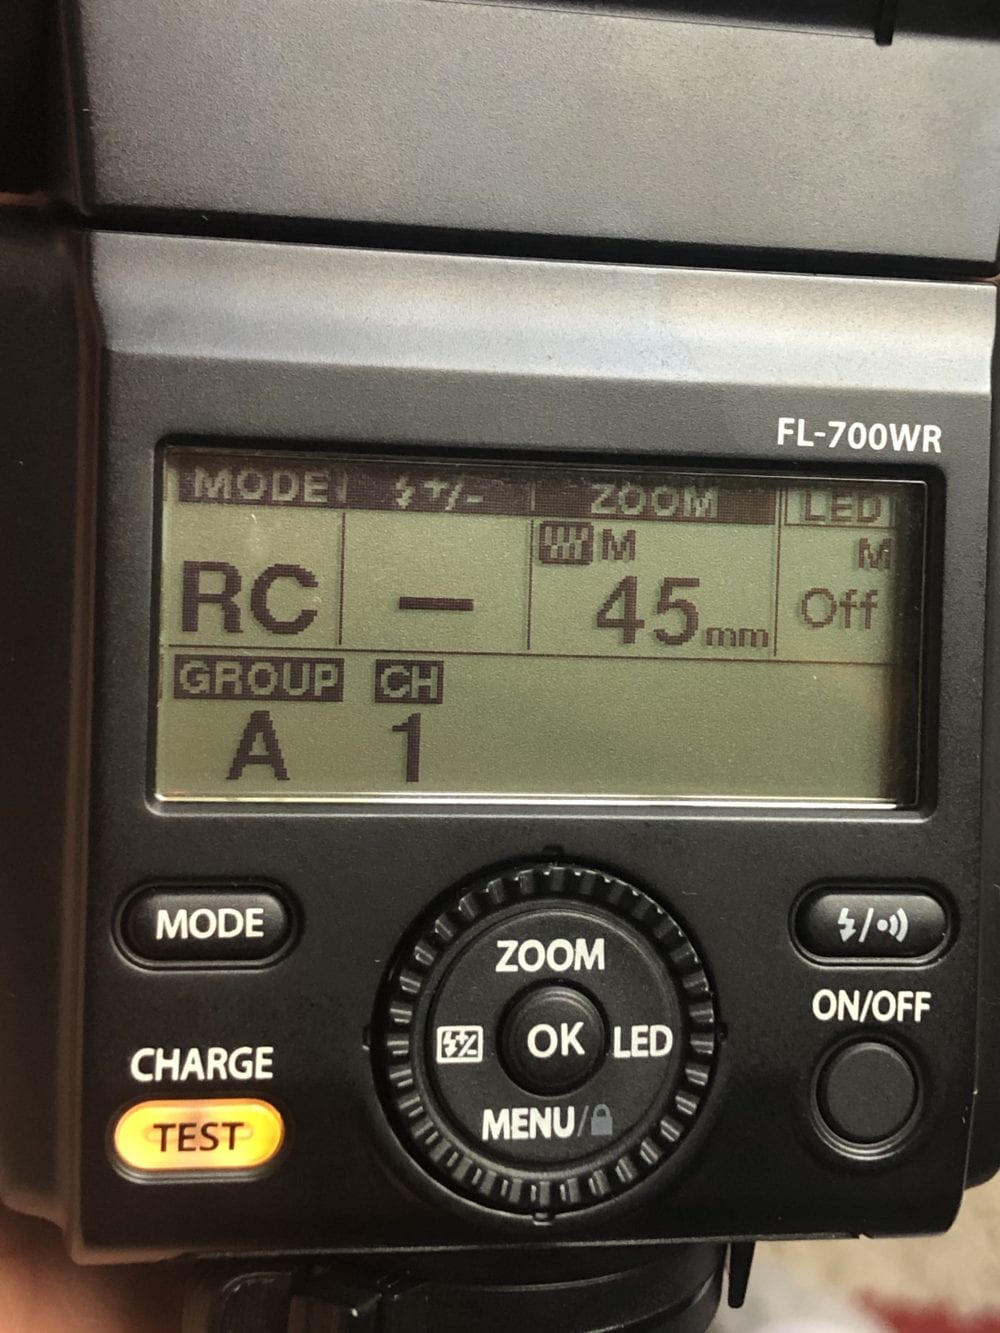 Olympus FL-700wr flash review and radio wireless set up | Rob